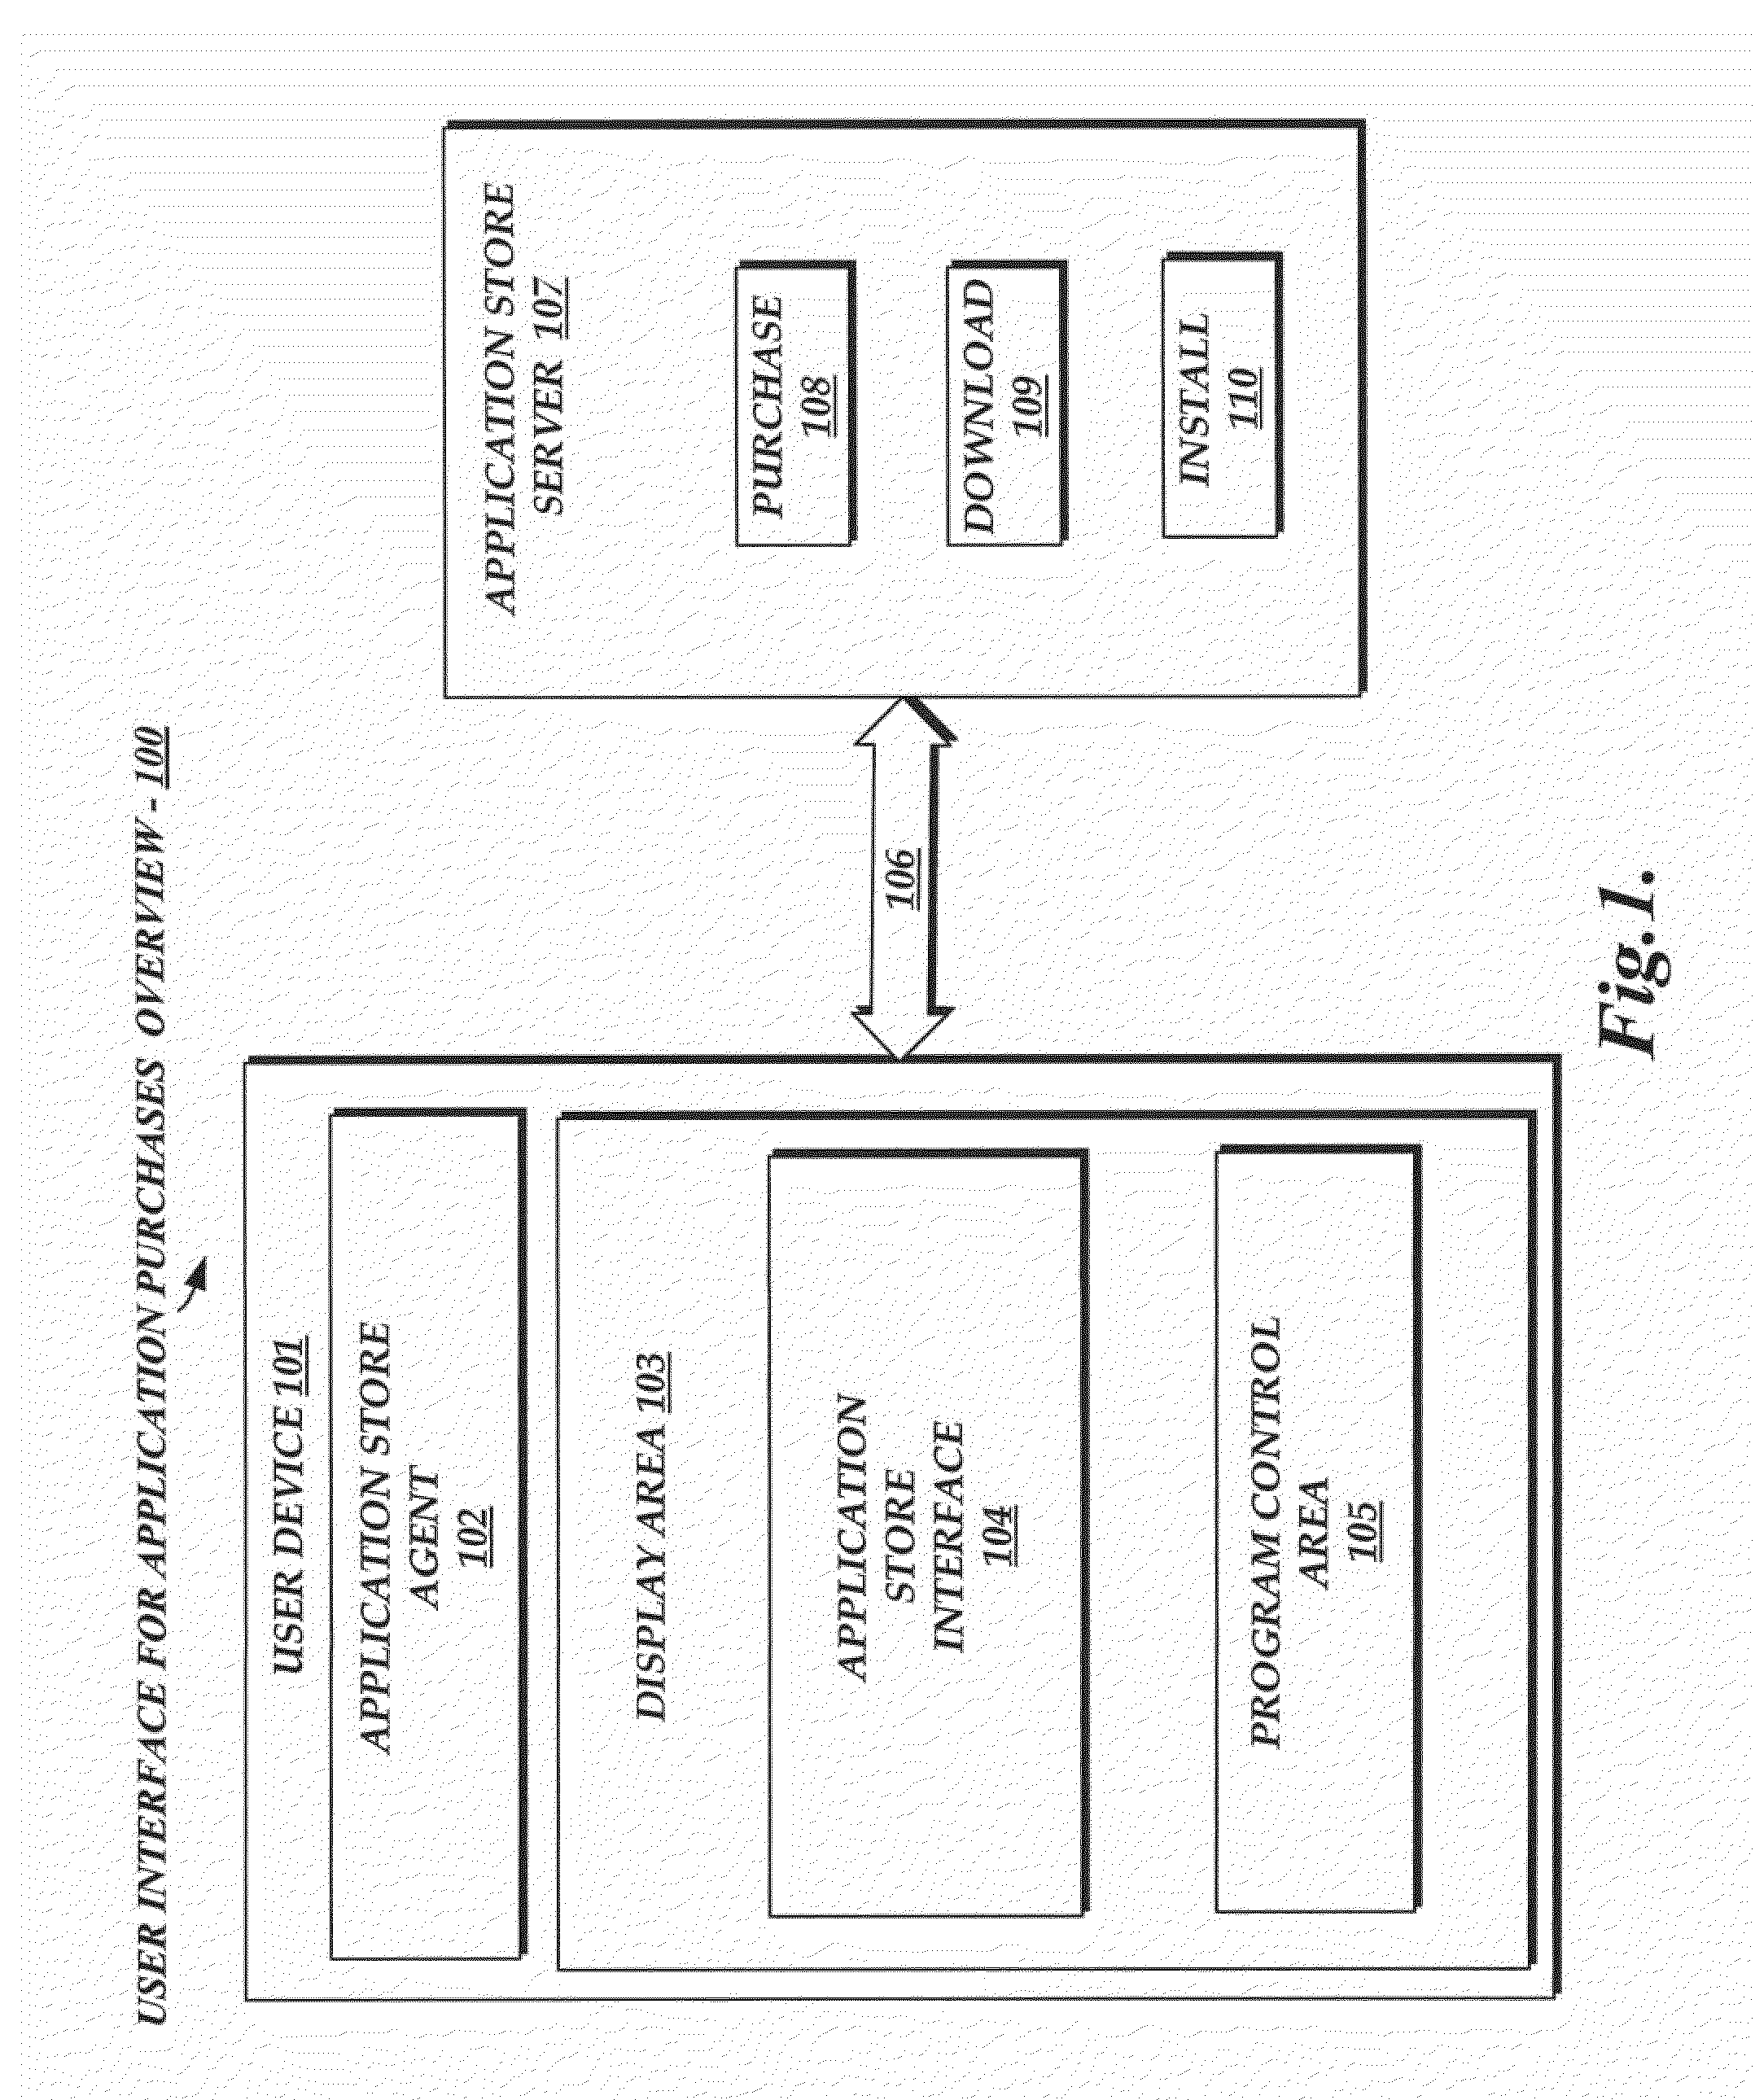 User interface for application transfers